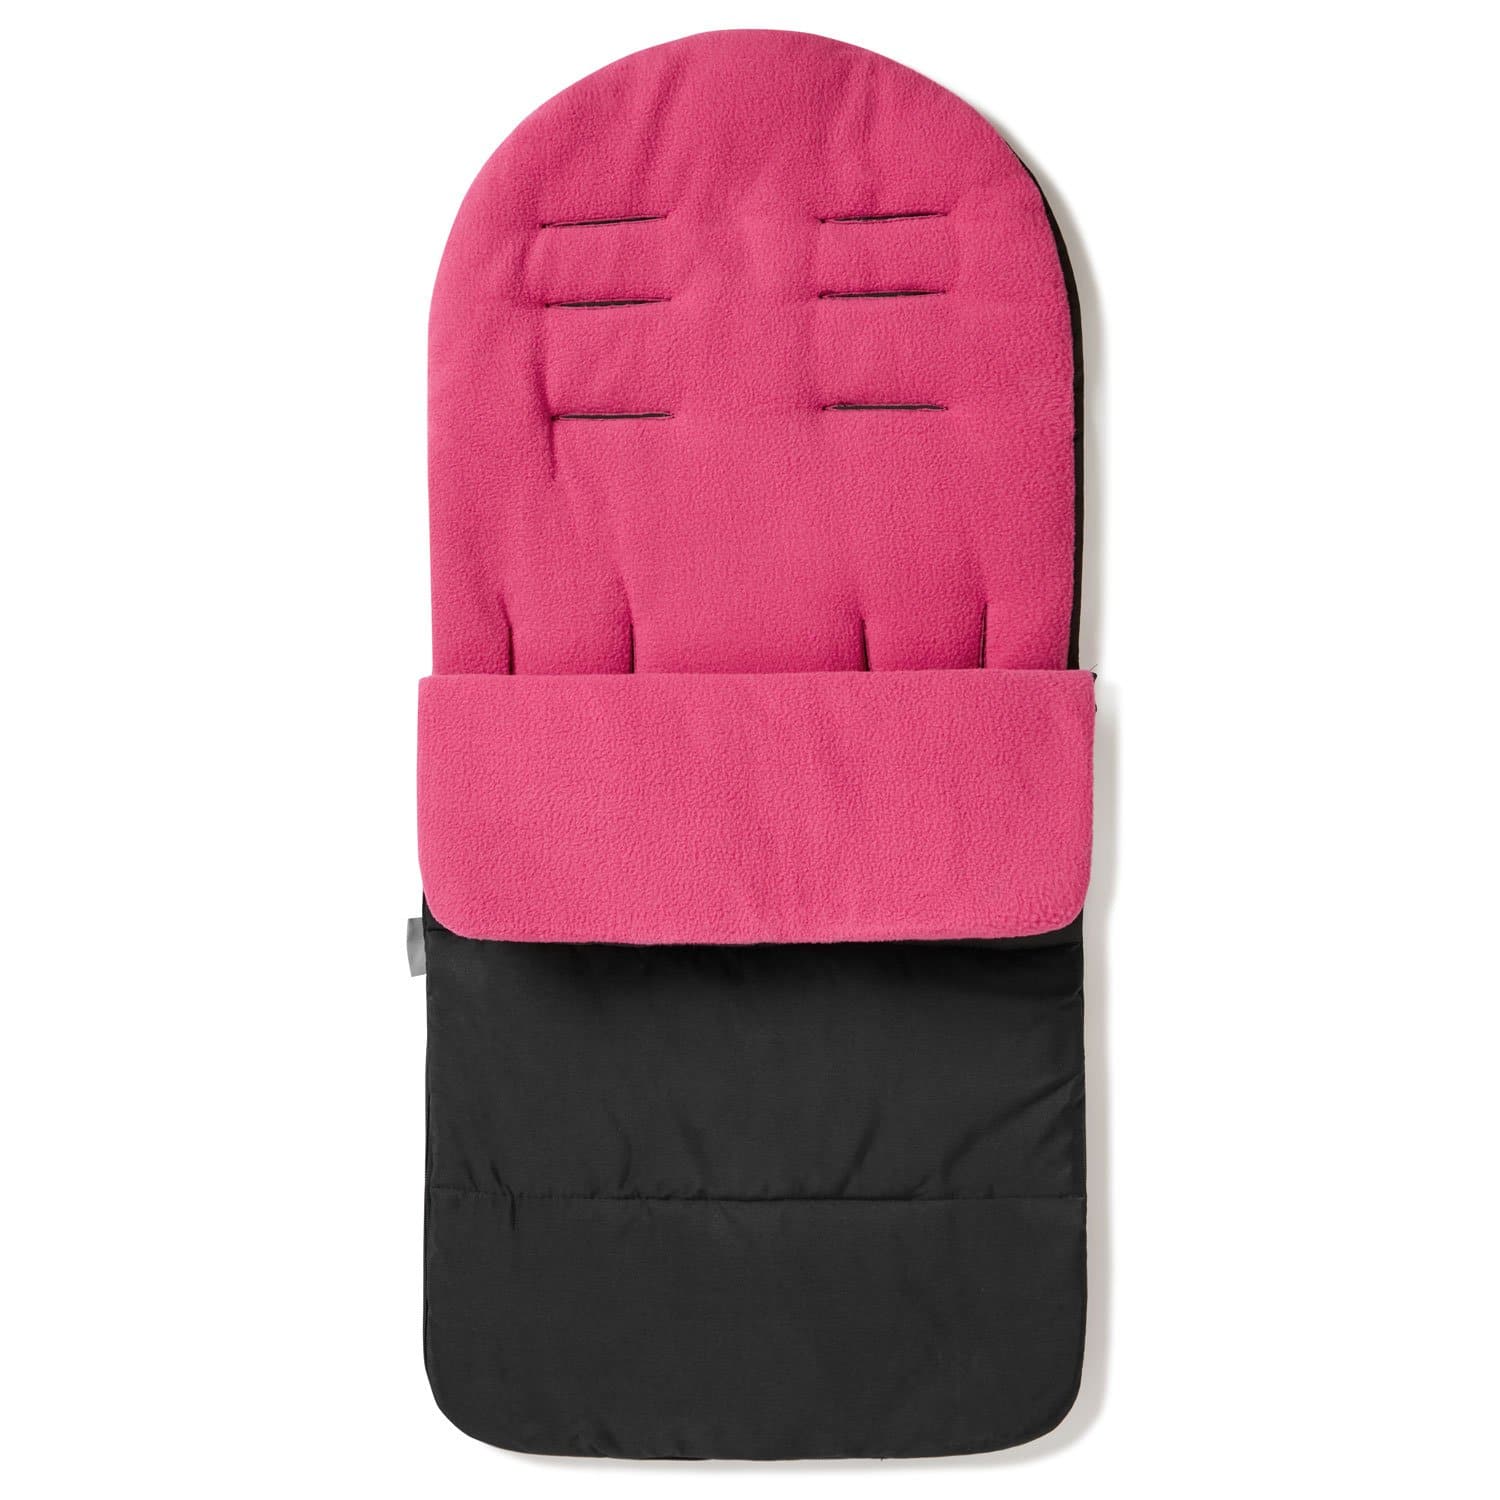 Premium Footmuff / Cosy Toes Compatible with NeoNato - Pink Rose / Fits All Models | For Your Little One